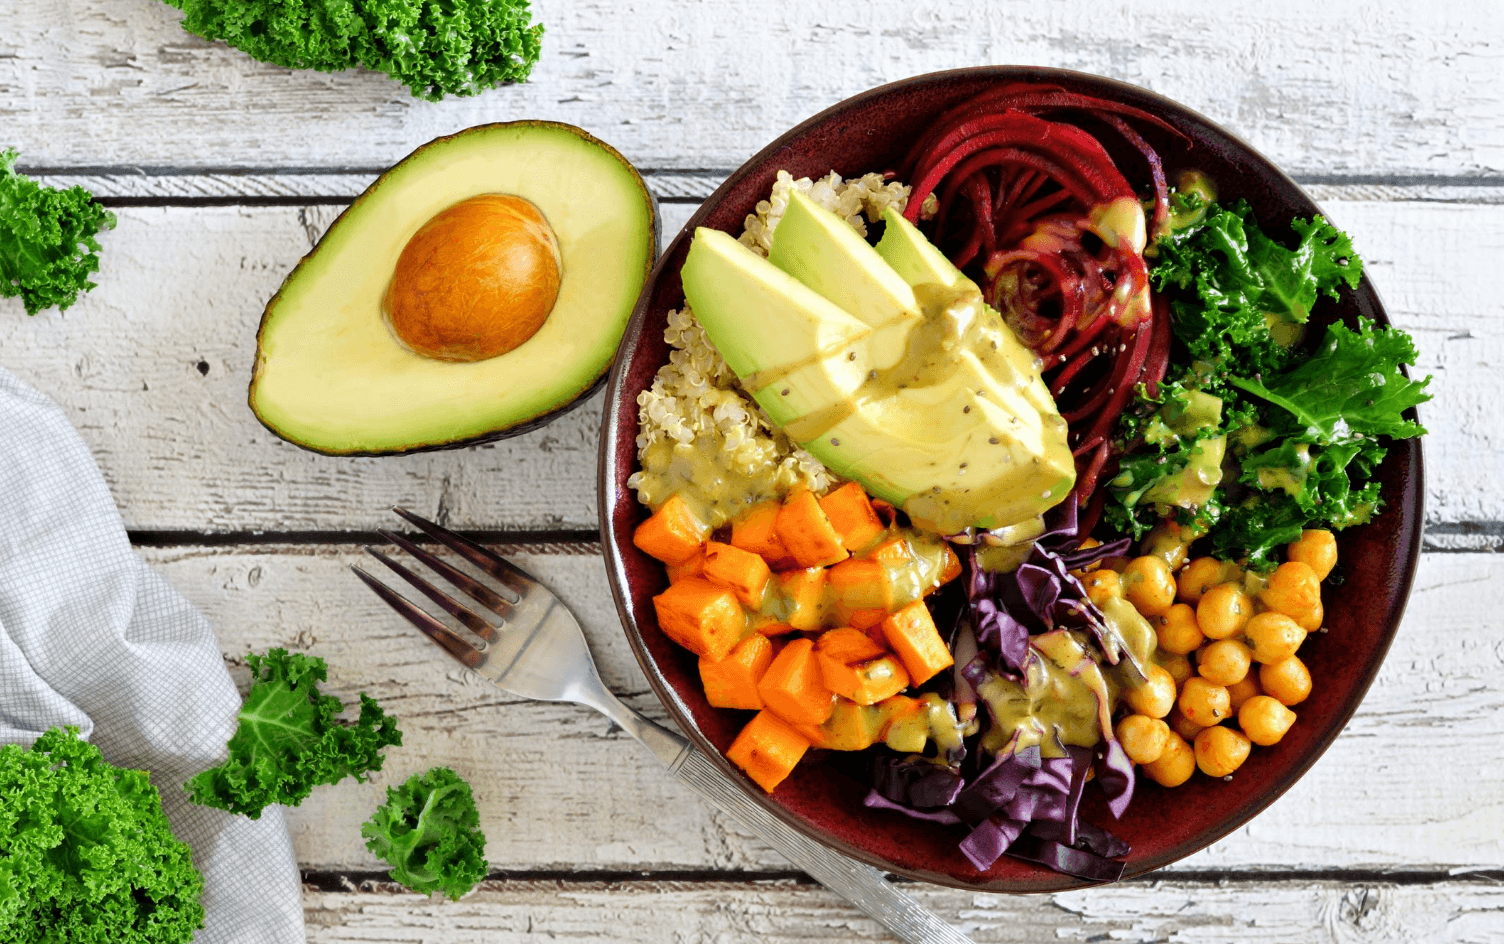 Overhead view of a bowl filled with sweet potato, quinoa, cabbage, chickpeas, beets, and greens, with half an avocado and a fork lying to the side.